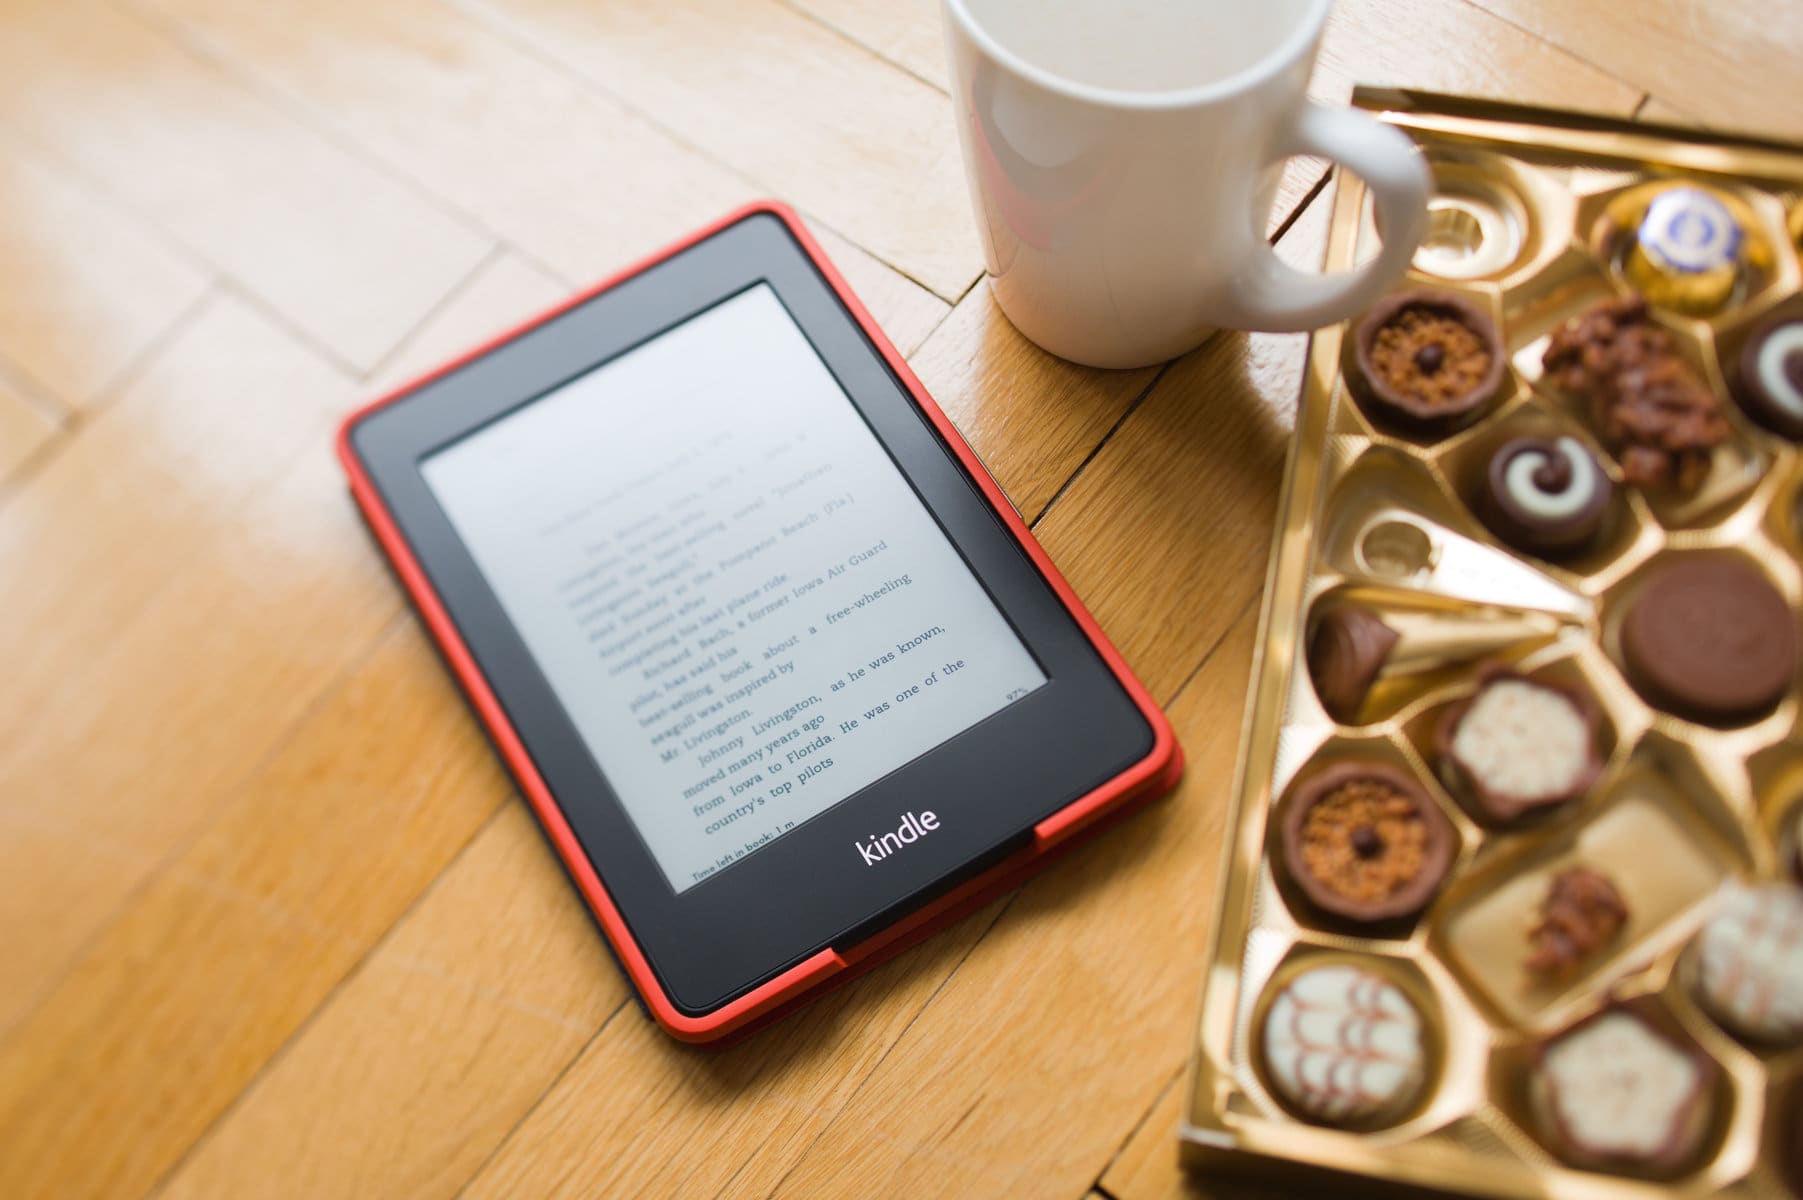 6 Helpful Accessibility Features in the  Kindle